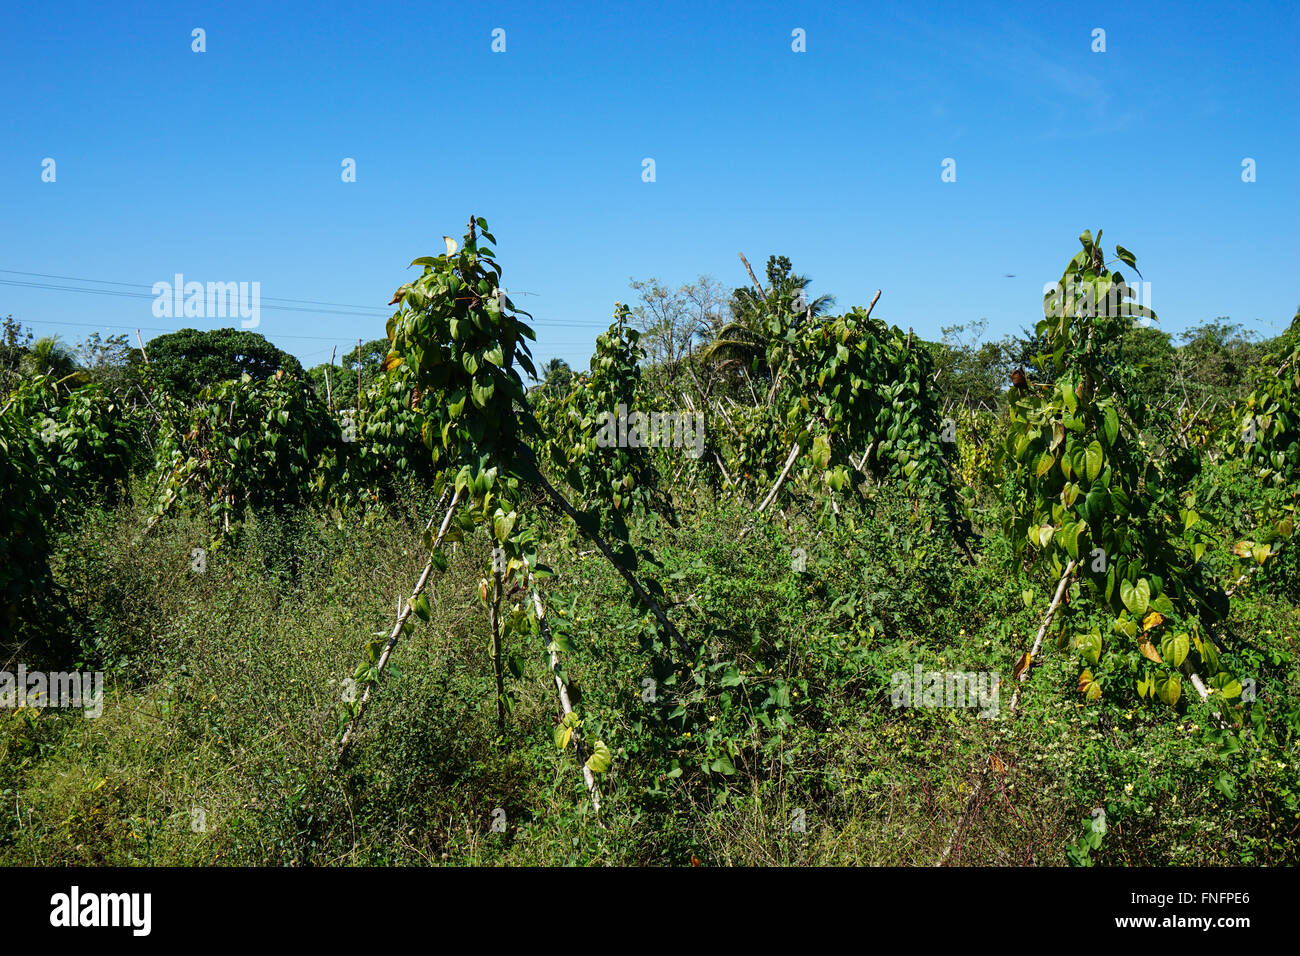 Tropical agricultural land with yams plants staked and growing Stock Photo